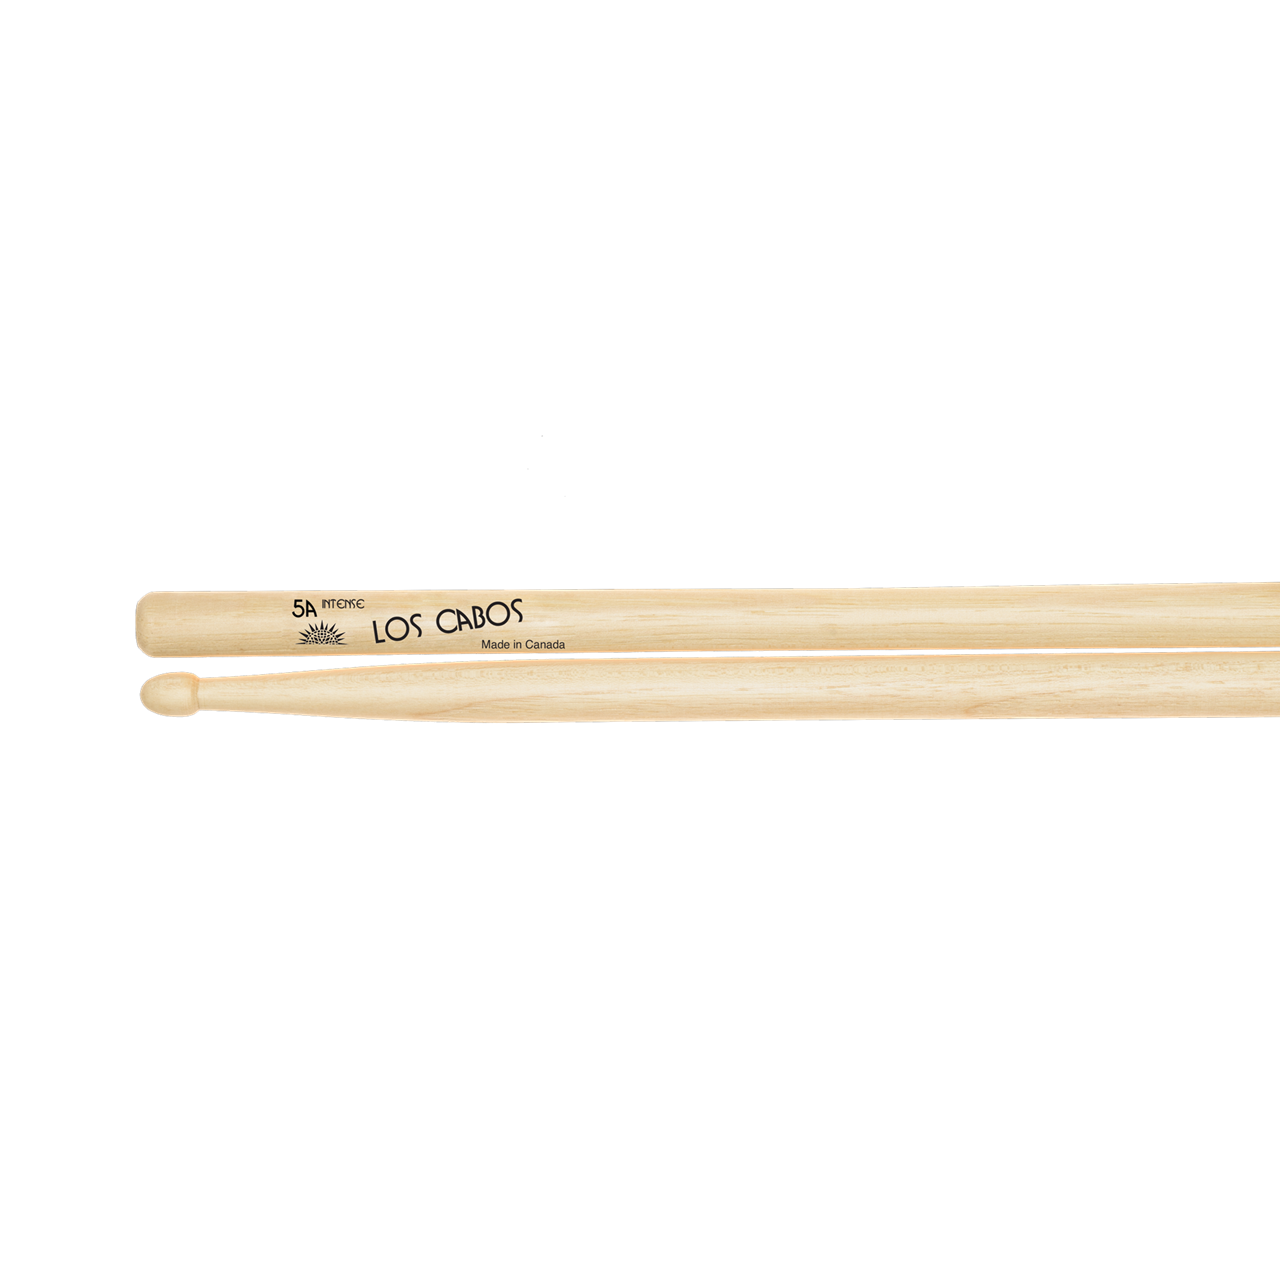 Los Cabos Drumstick 5A Intense White Hickory